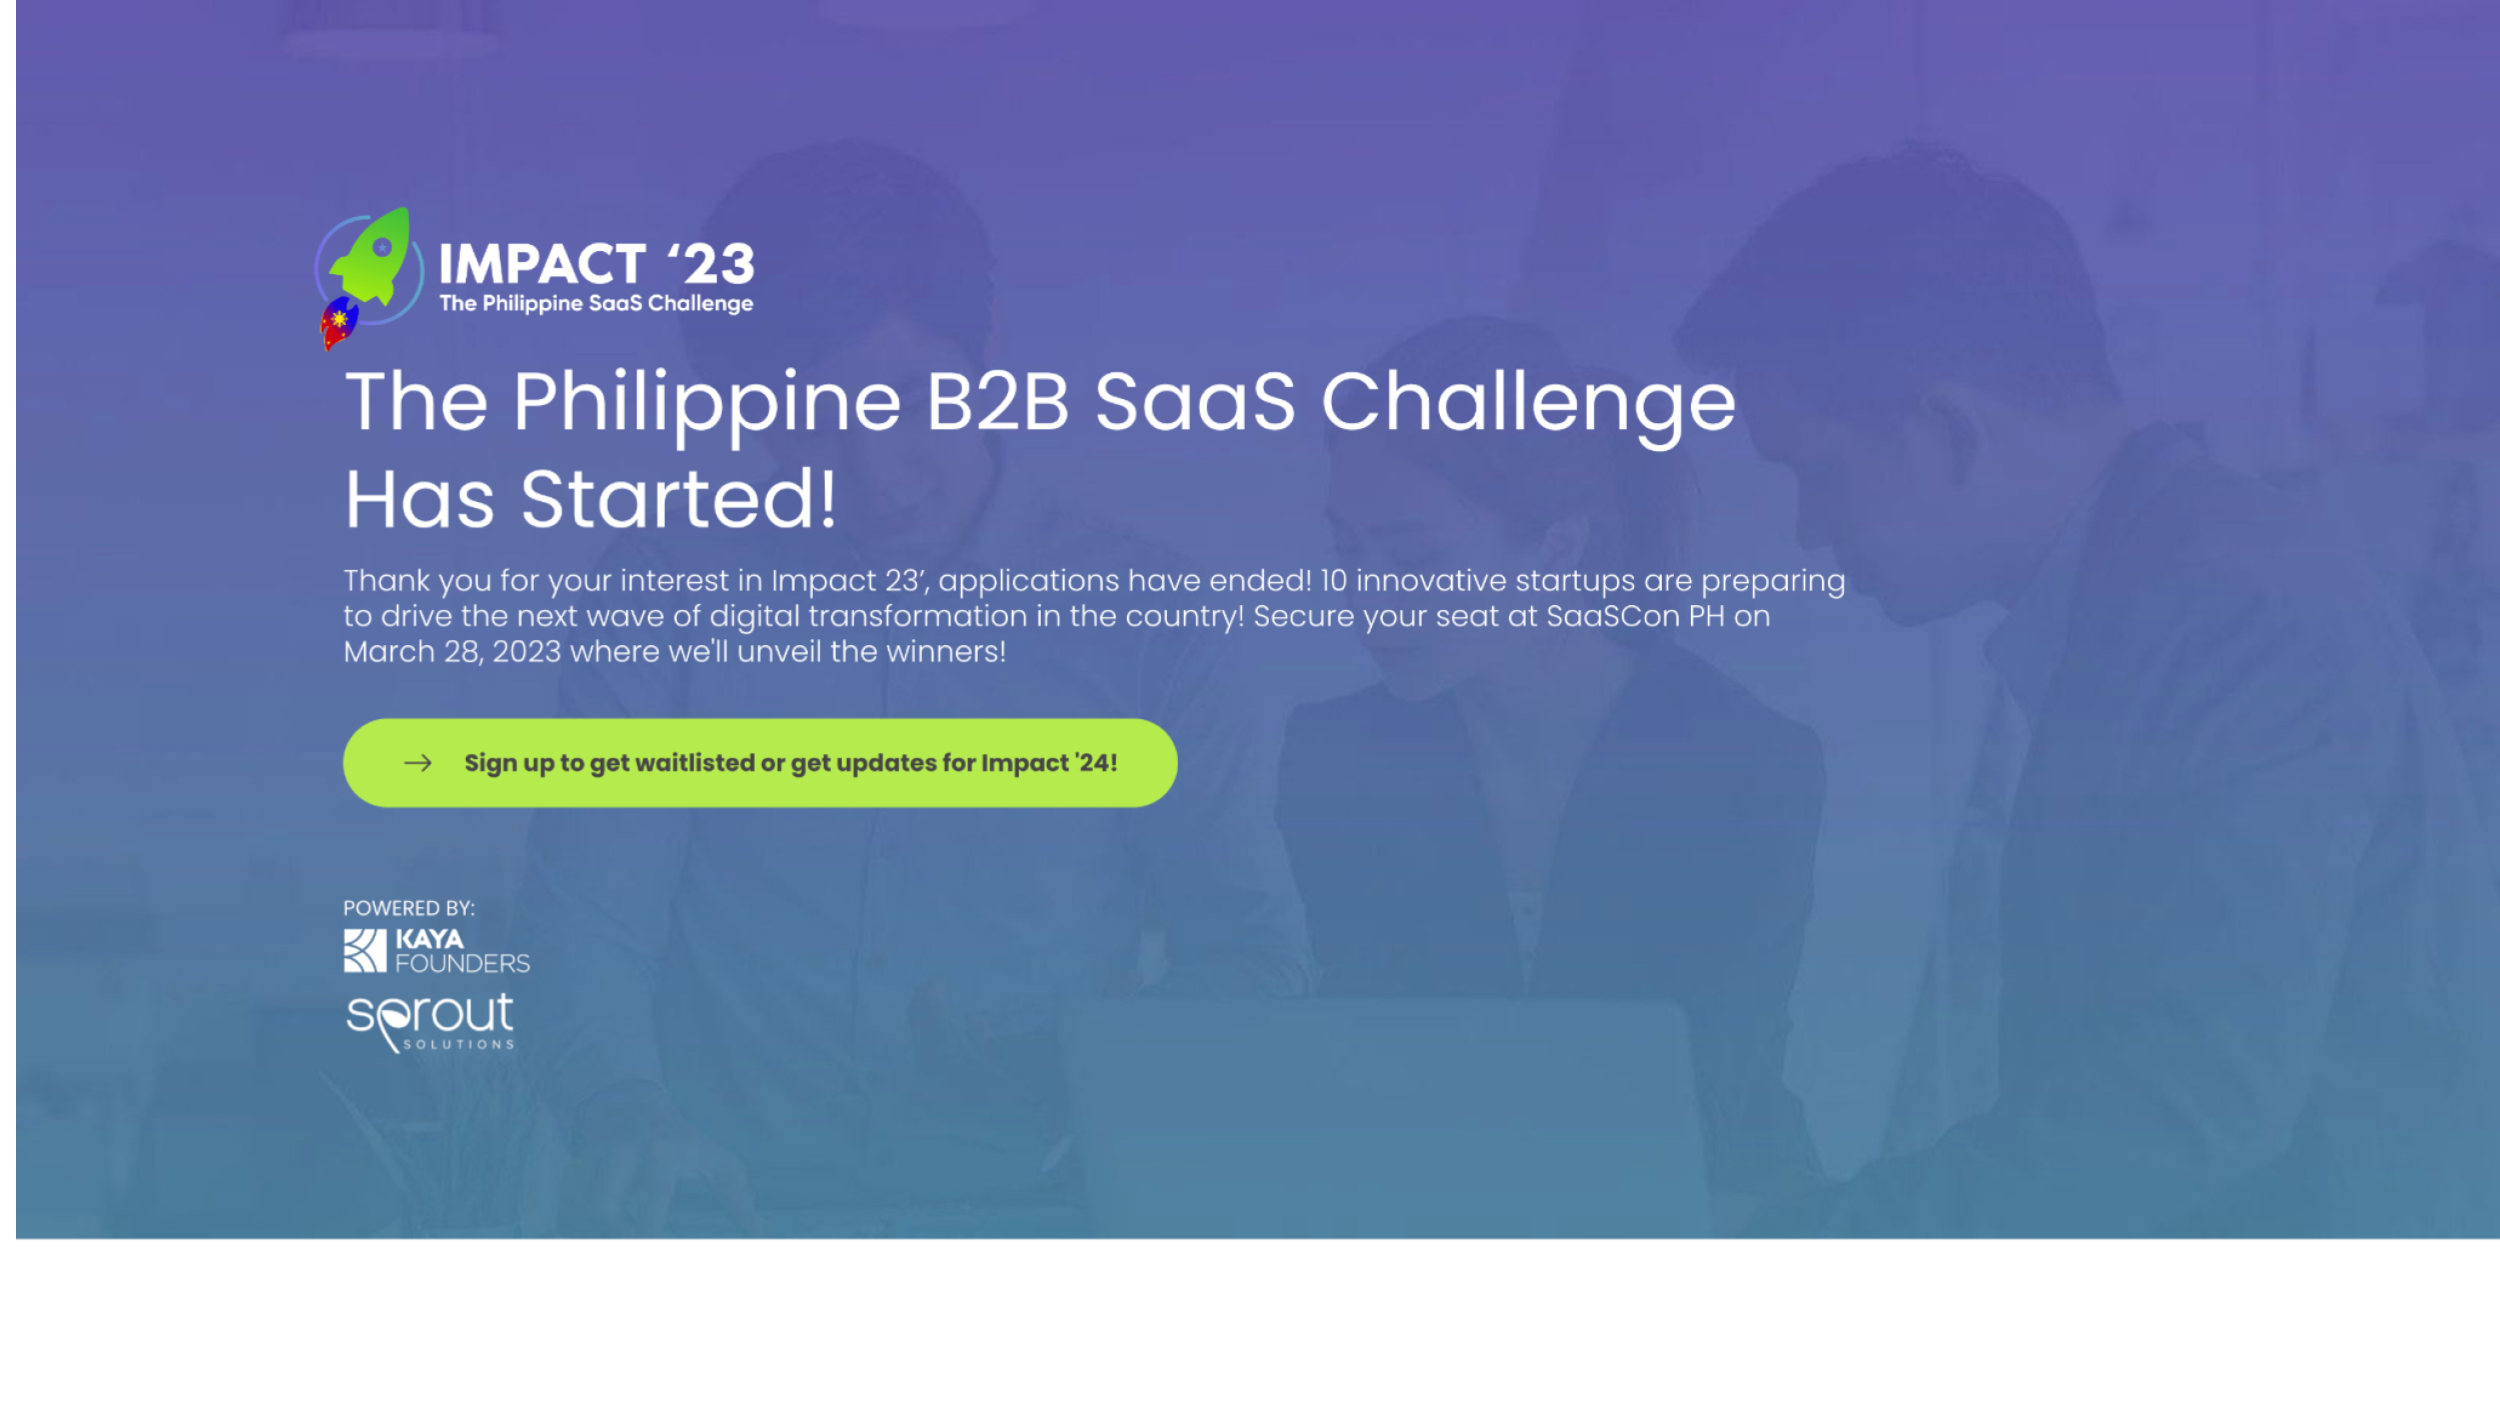 IMPACT '23 is an 8-week startup accelerator challenge designed for early-stage startups in the Philippines